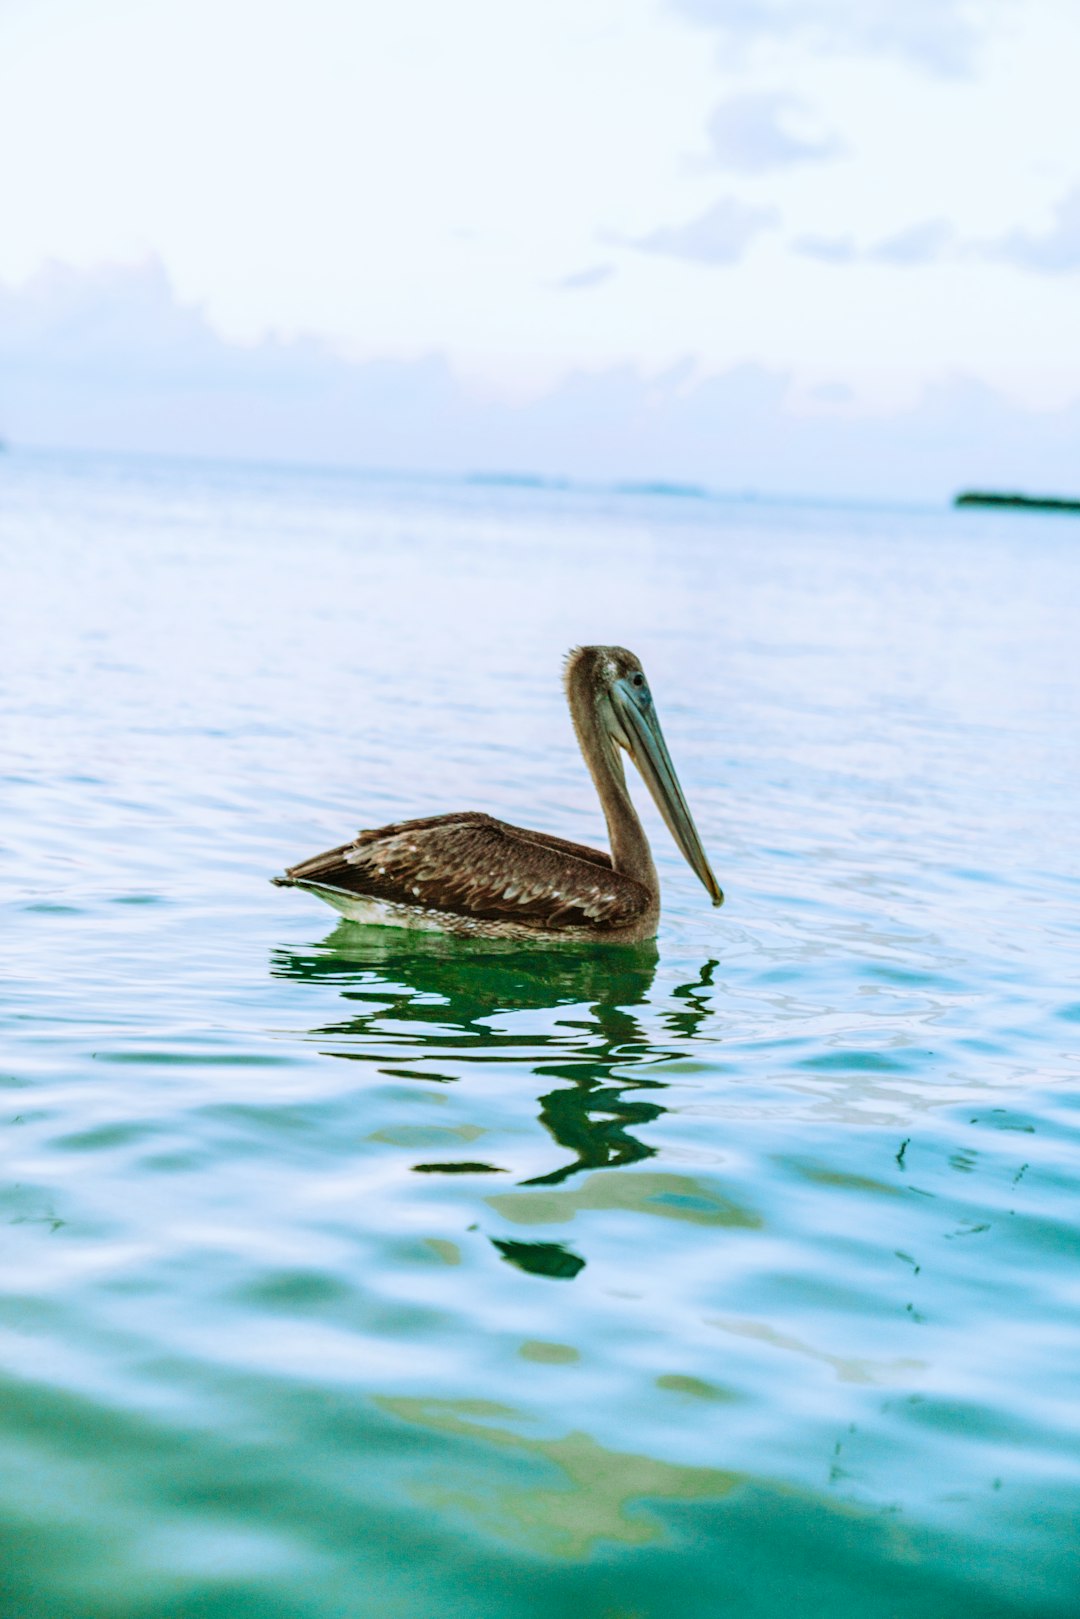 brown and white pelican on body of water during daytime